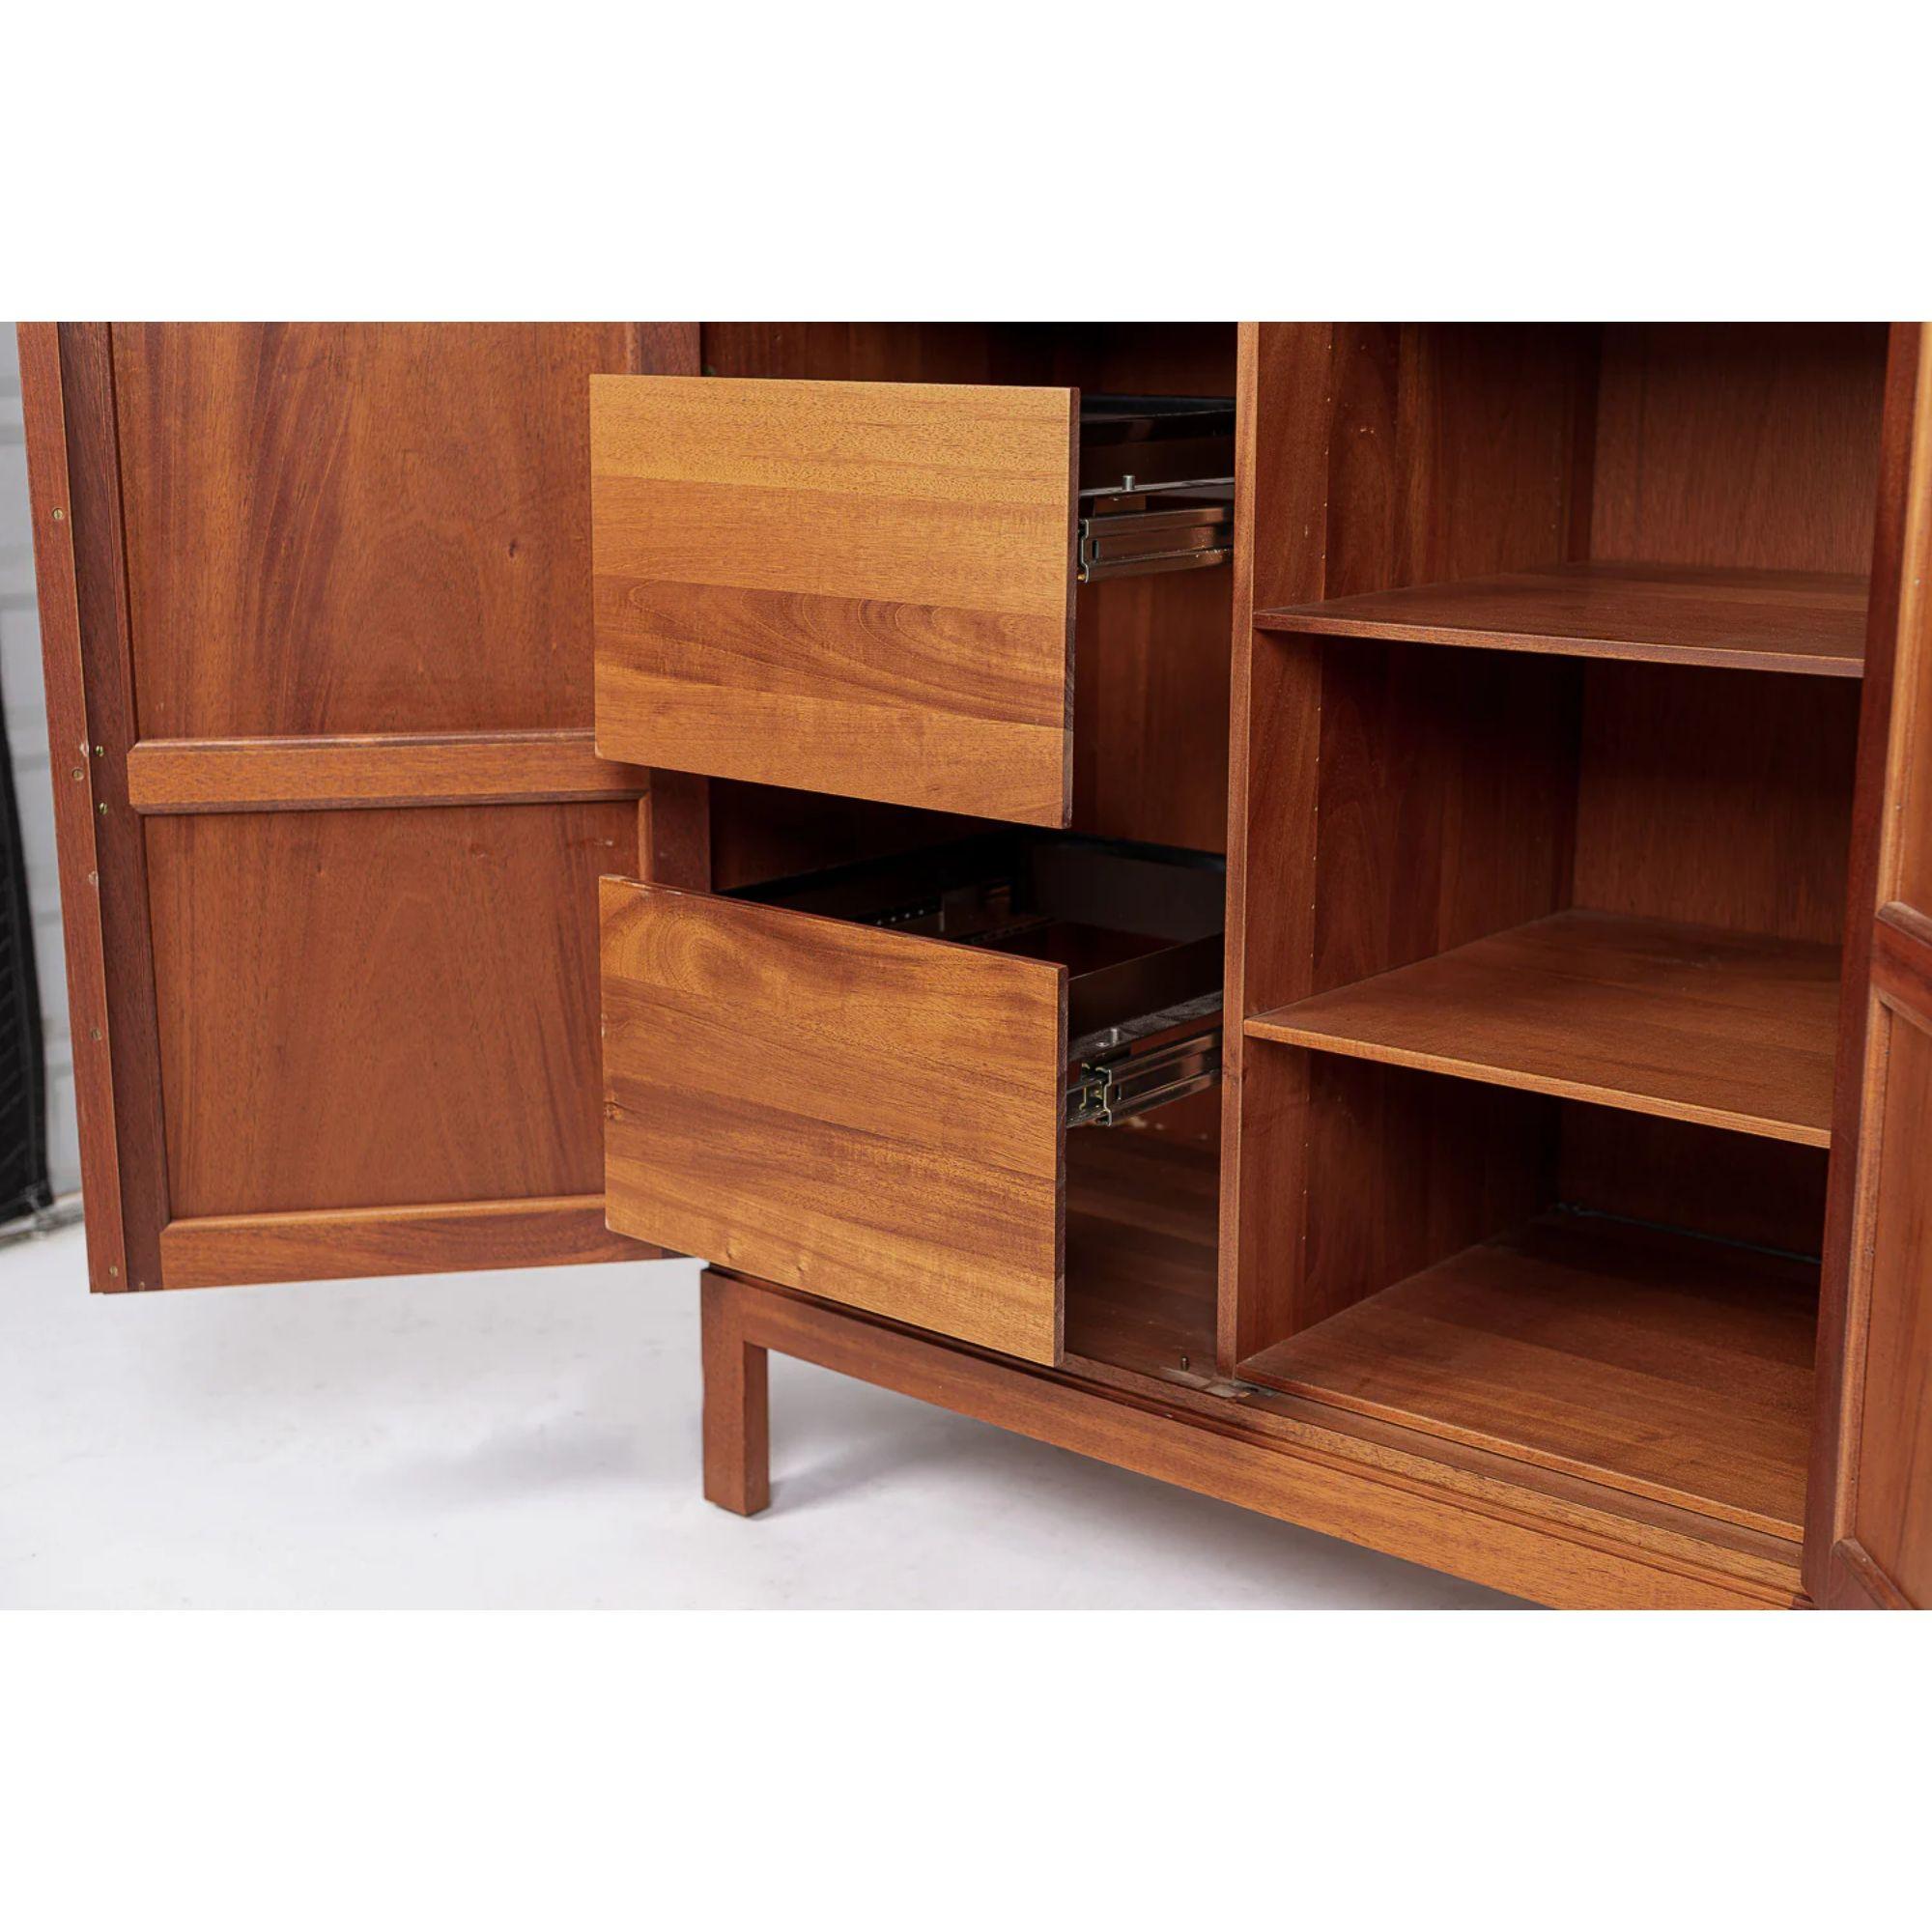 Midcentury Danish Wood Storage Cabinets with Glass Doors & File Drawer 3